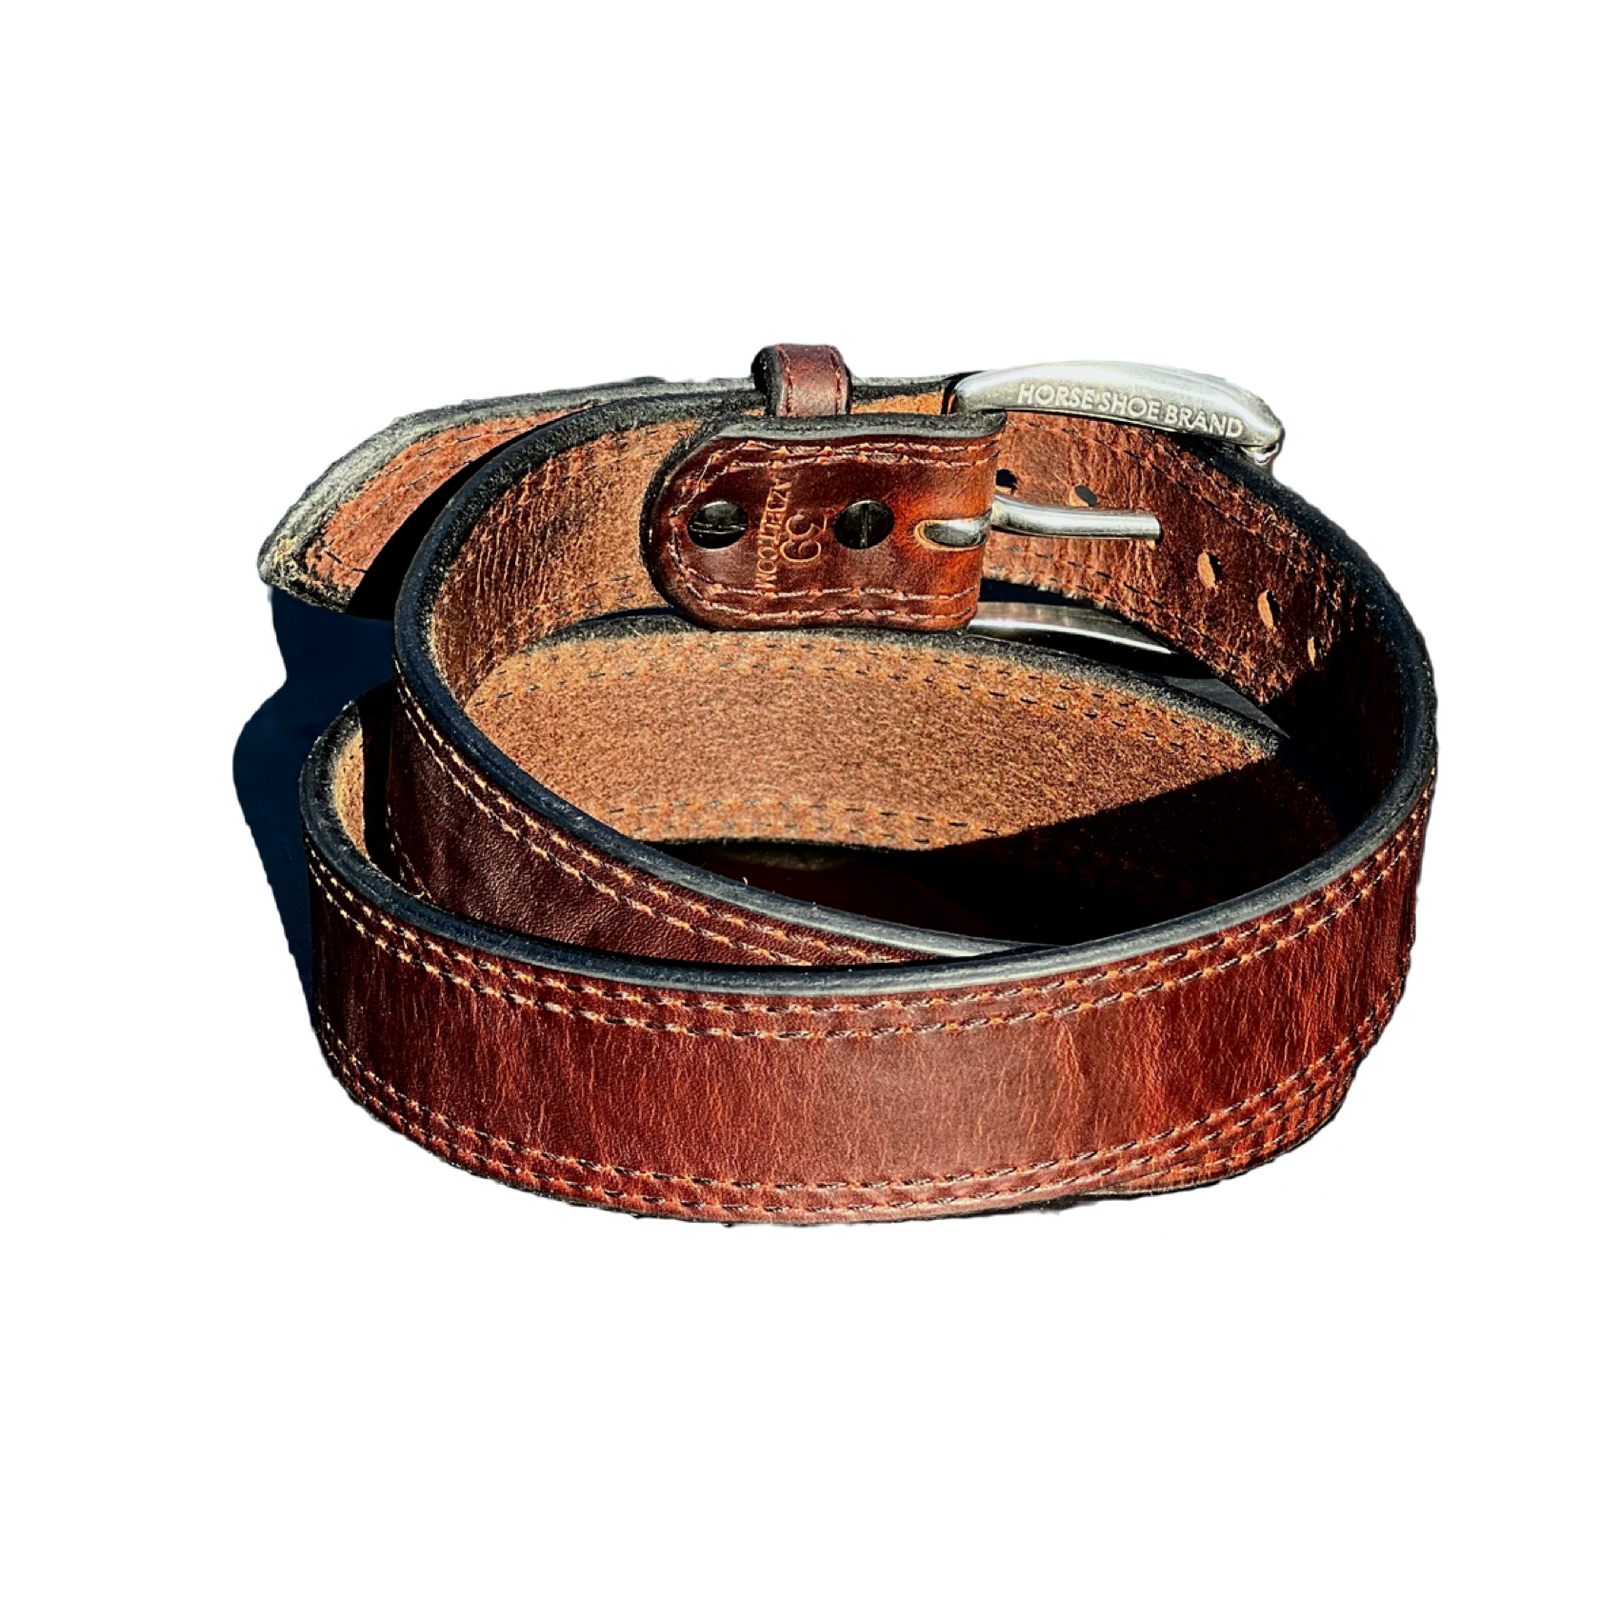 SLC Springfield Leather Company 5 Pack Natural Veg Tan Belt Blank Kit for Kids Belts and Dog Collars